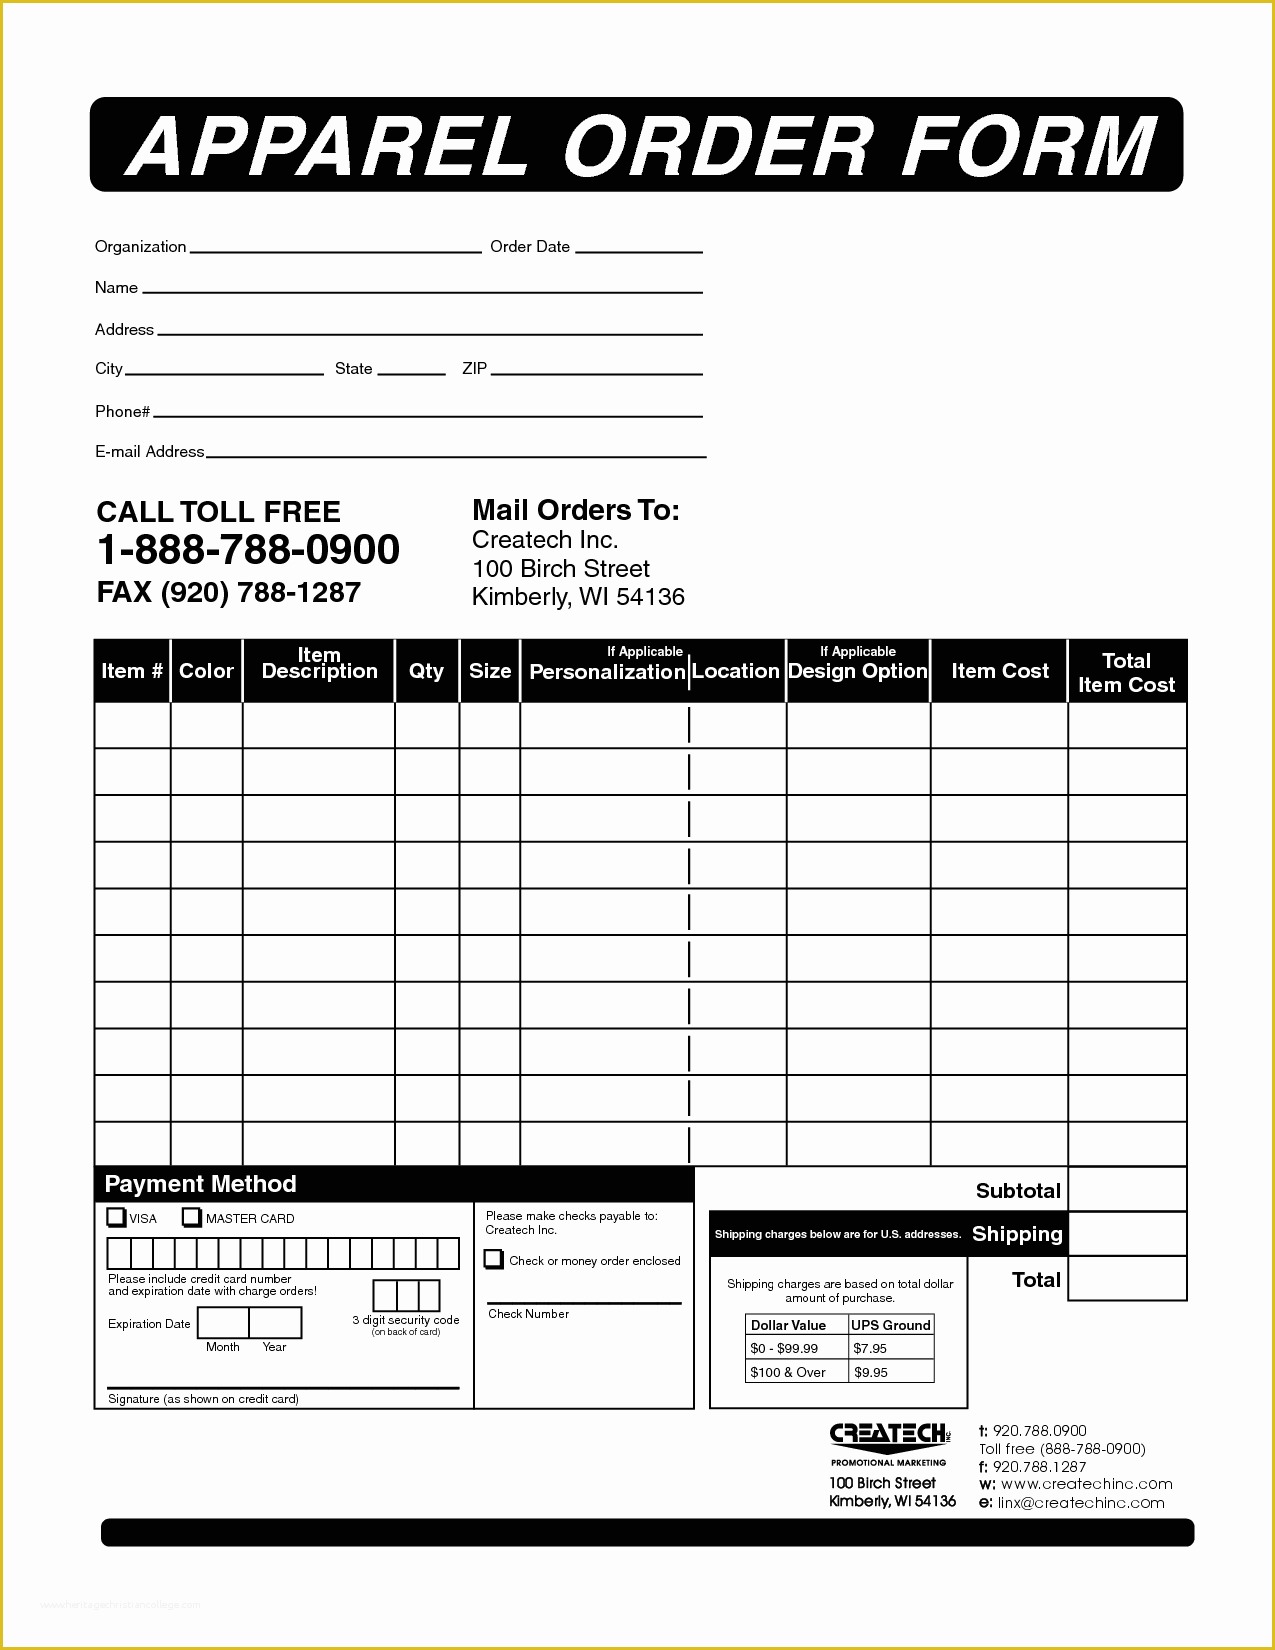 Merchandise order form Template Free Of 28 Clothing order form Template Enernovva org